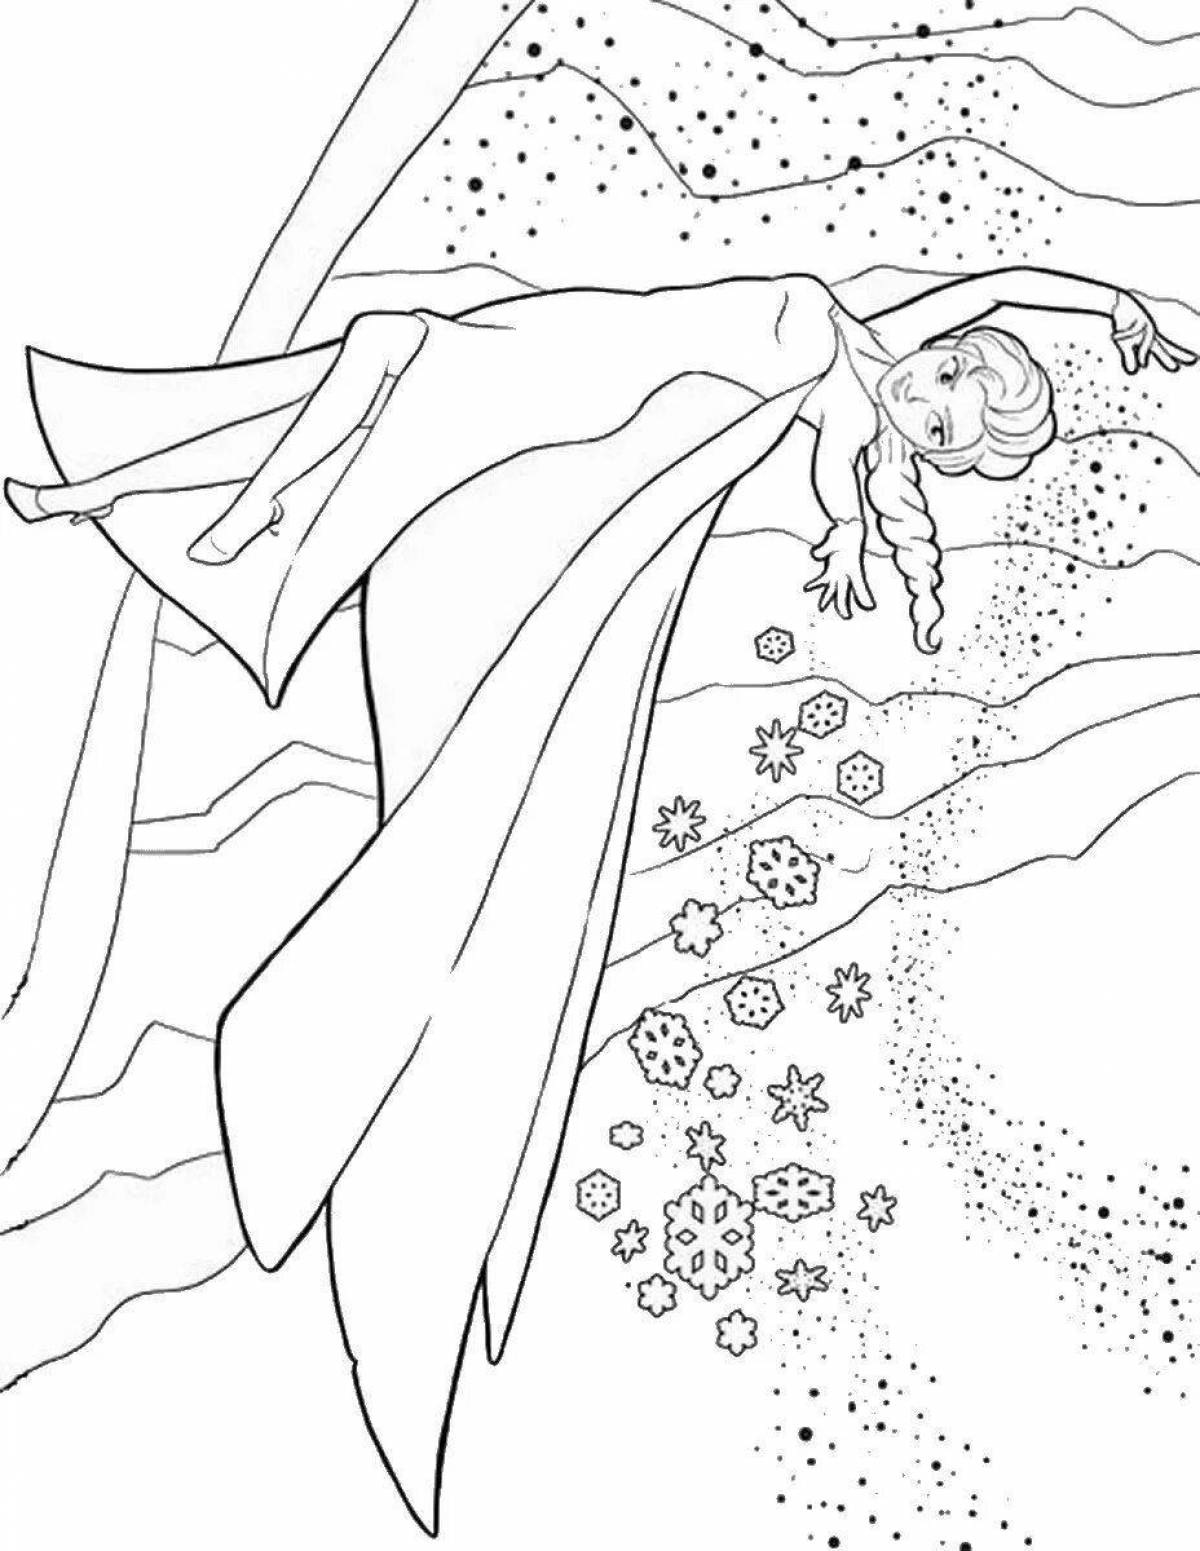 Shiny snow queen coloring book for girls